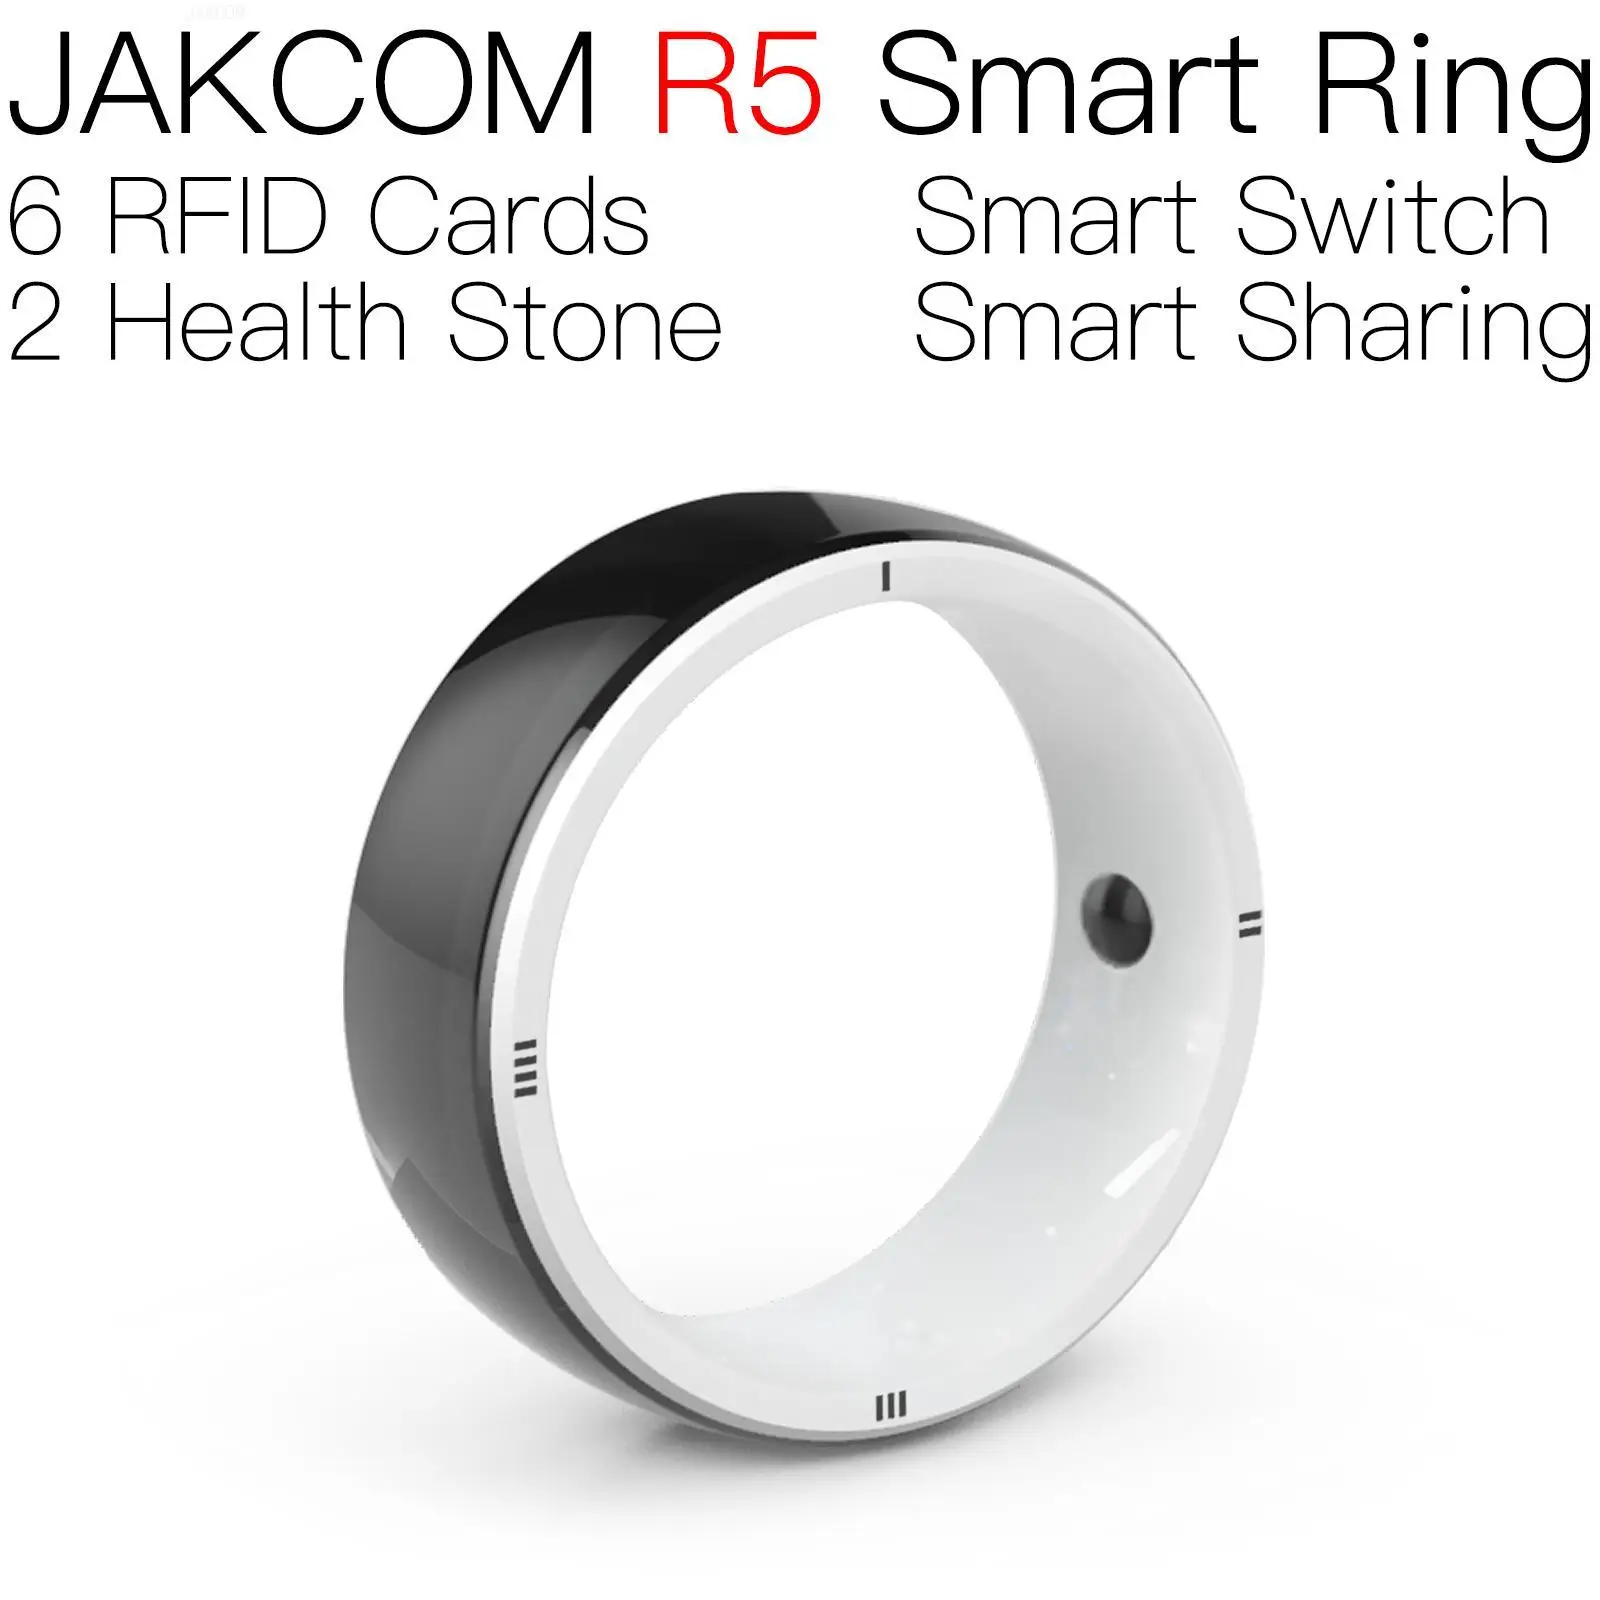 

JAKCOM R5 Smart Ring better than smart card nfc toner 215a with chip 2 rupees items shipping rfid ring 125 khz home